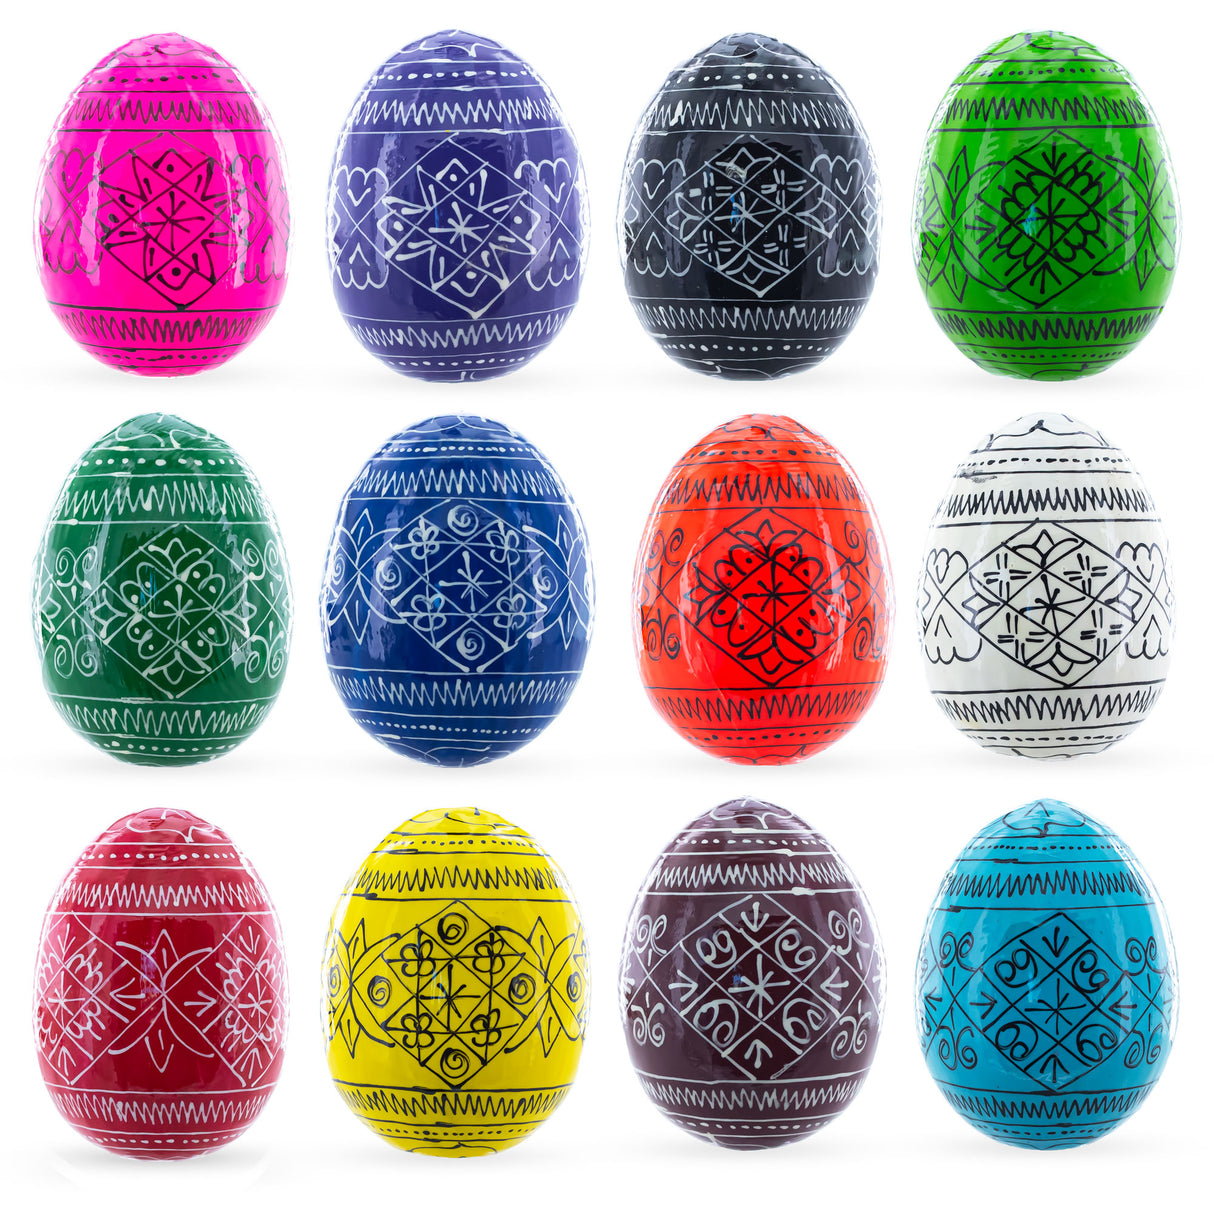 Set of 12 Multicolored Hand Painted Ukrainian Wooden Easter Eggs 2.5 Inches in Multi color, Oval shape